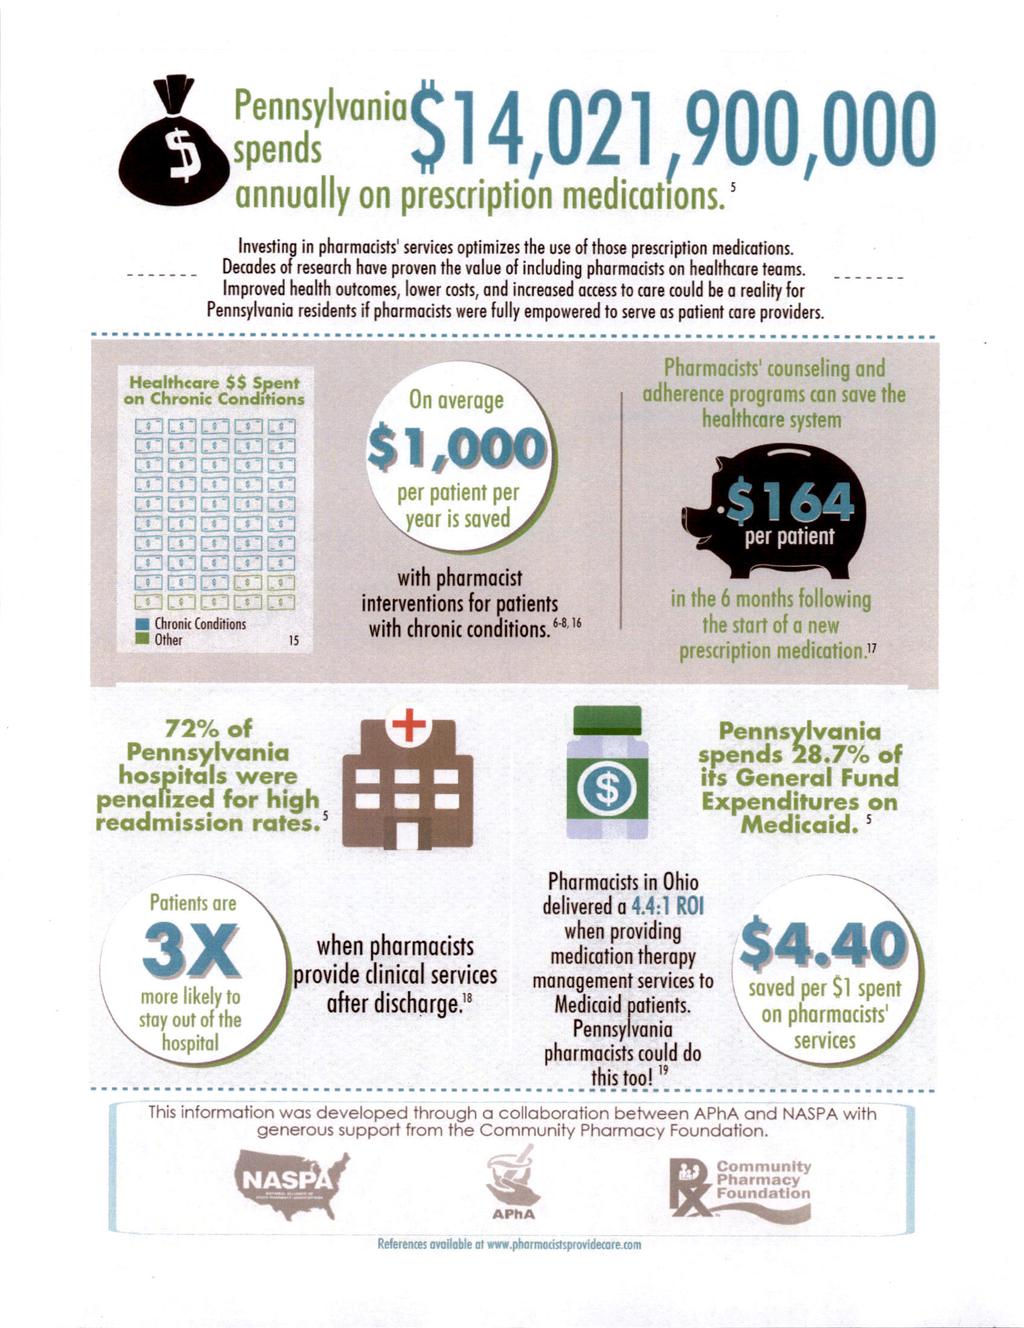 V ^^^spends 514,021,900,000 annually on prescription medications.' Investing in pharmacists' services optimizes the use of those prescription medications.